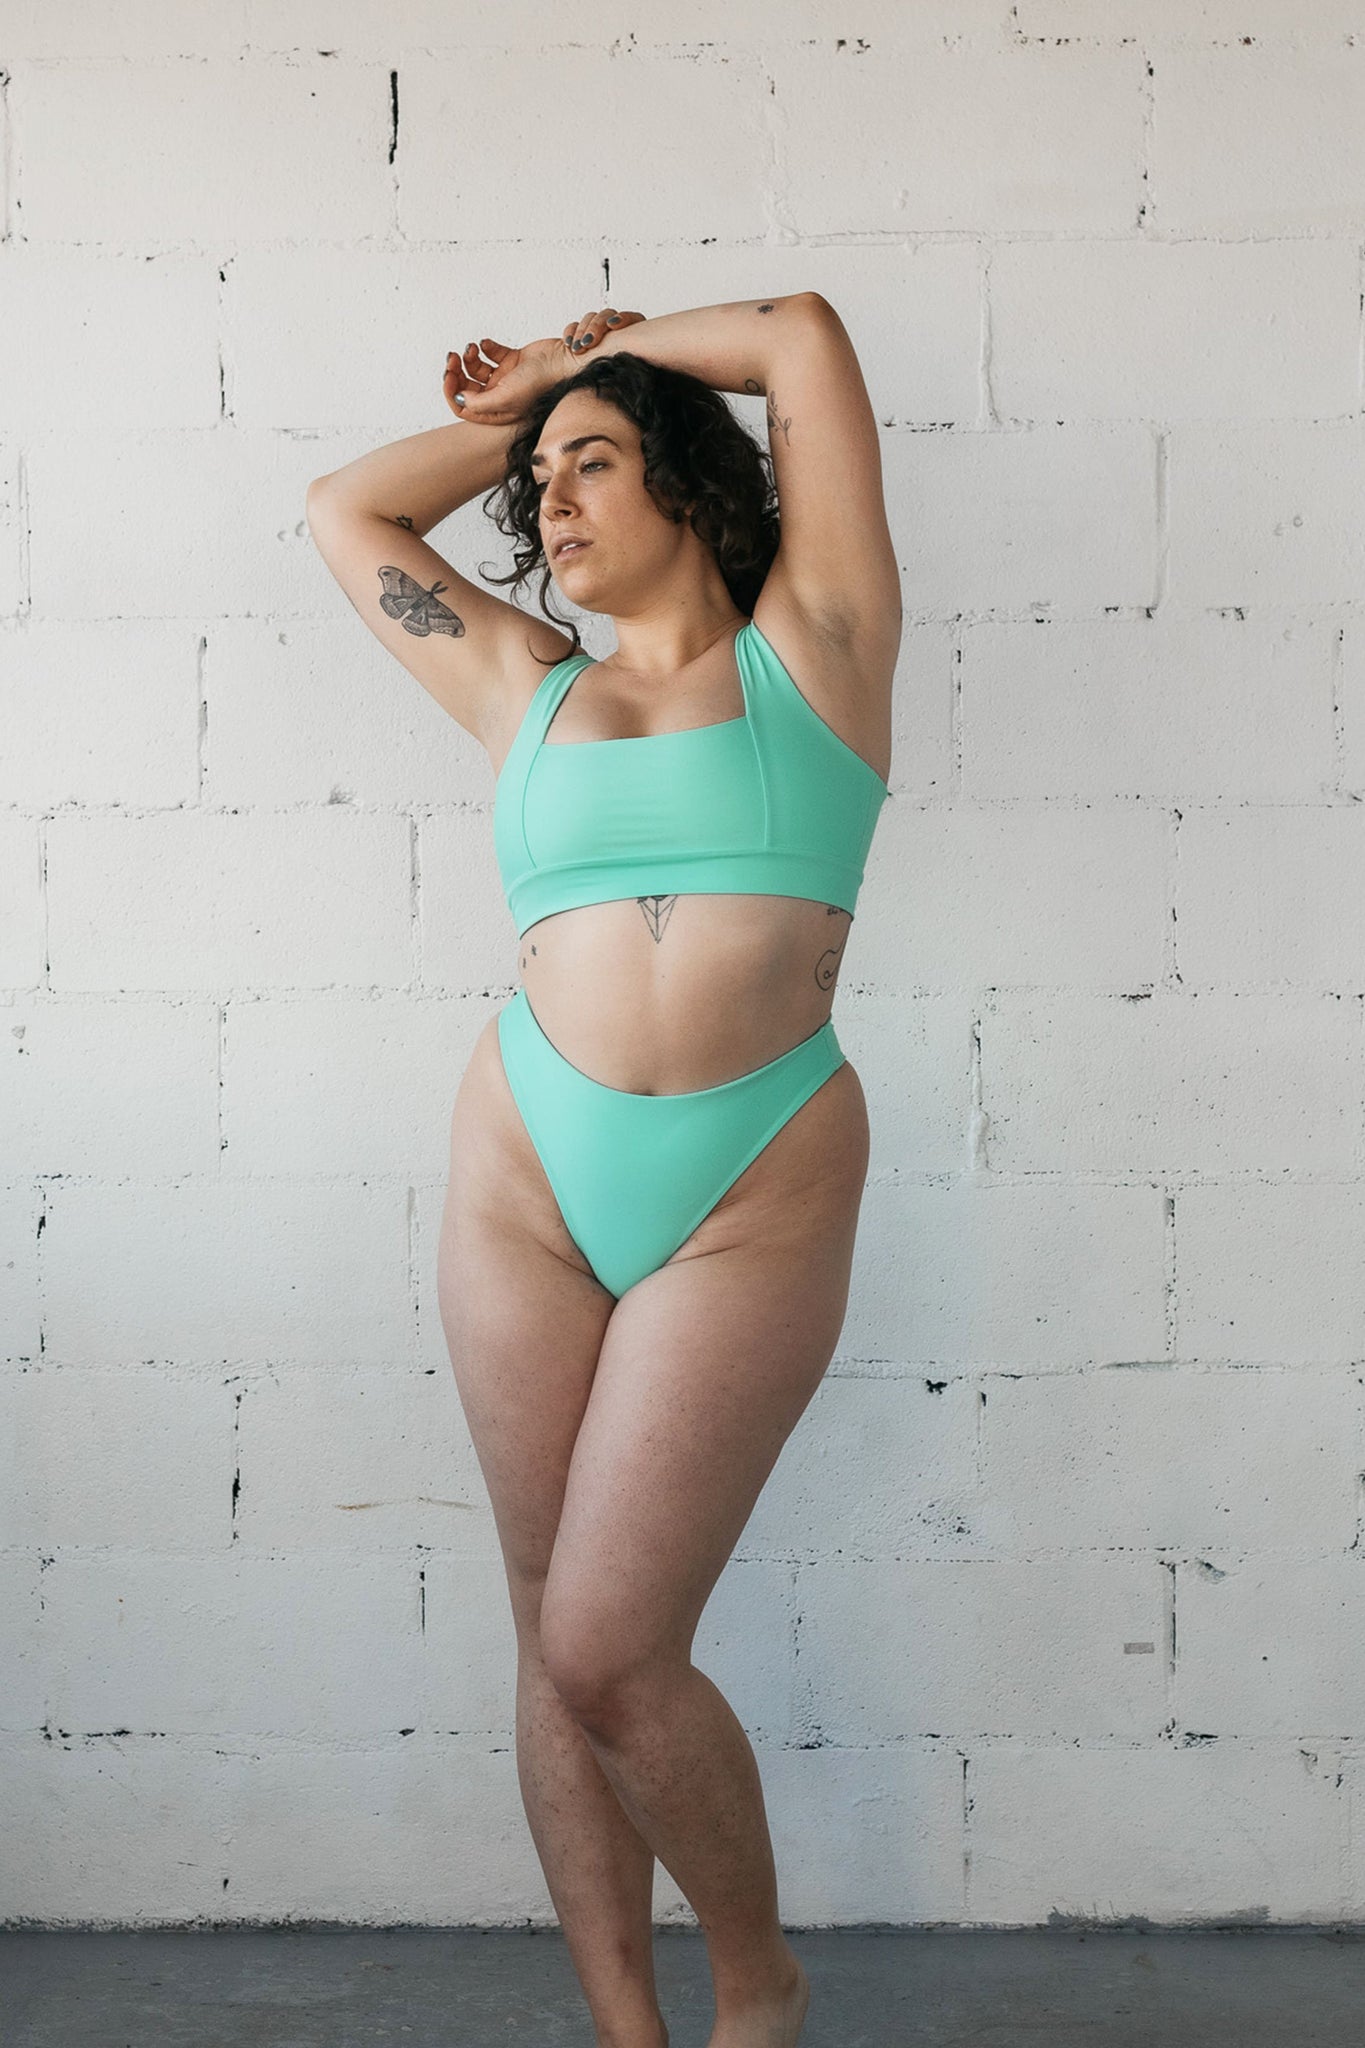 A woman standing with her hands crossed above her head wearing high cut turquoise bikini bottoms and a matching turquoise bikini top with a square neckline.